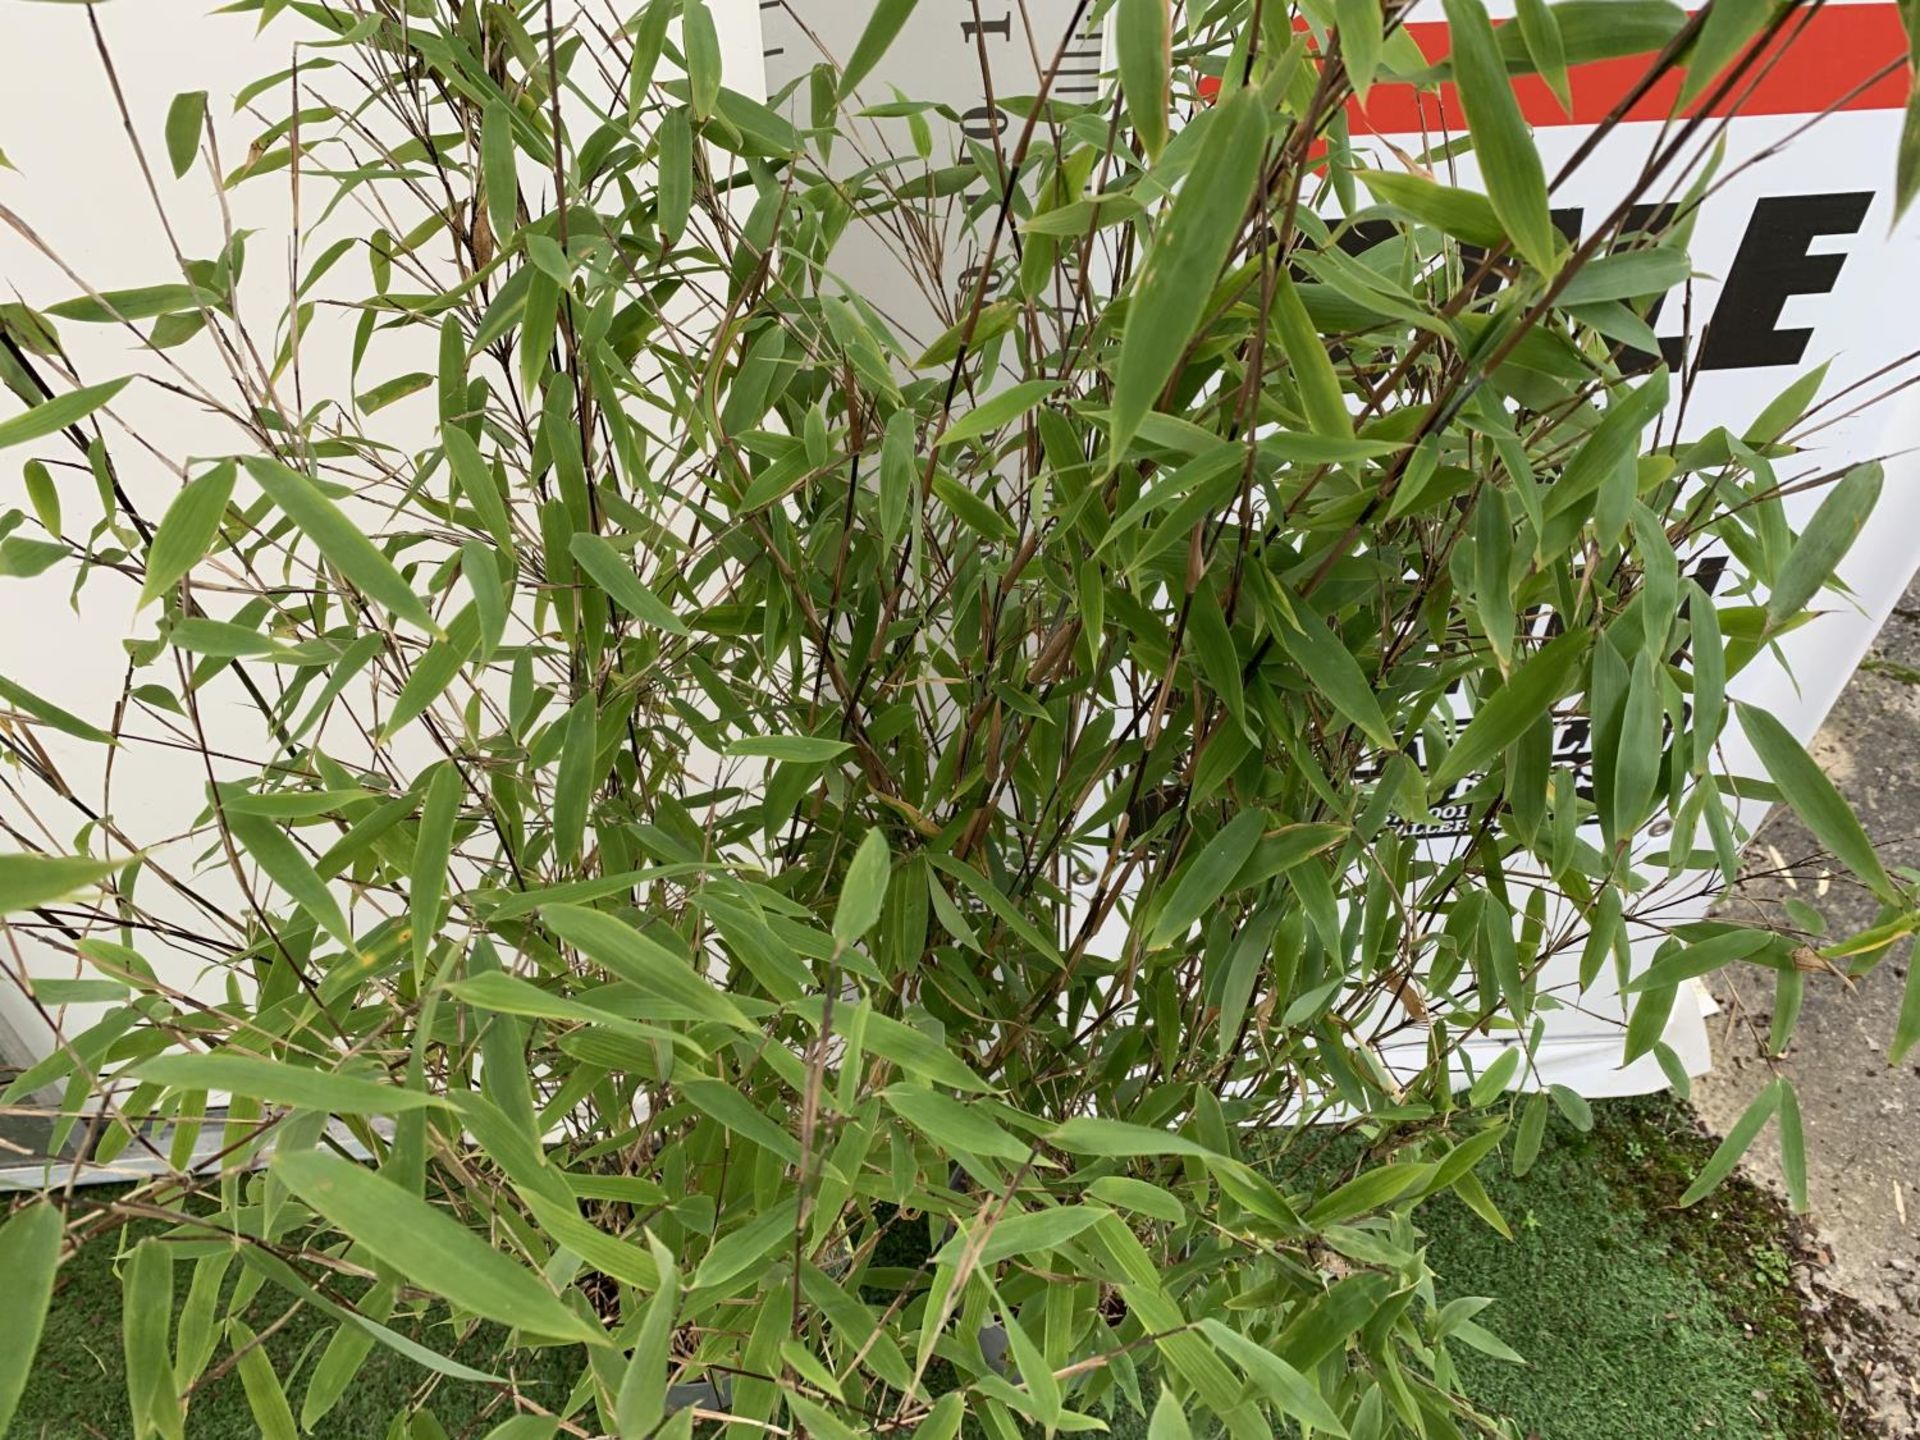 TWO FARGESIA BAMBOO PLANTS 'WINTER JOY' APPROX 180CM IN HEIGHT PLUS VATTO BE SOLD FOR THE TWO - Image 3 of 4